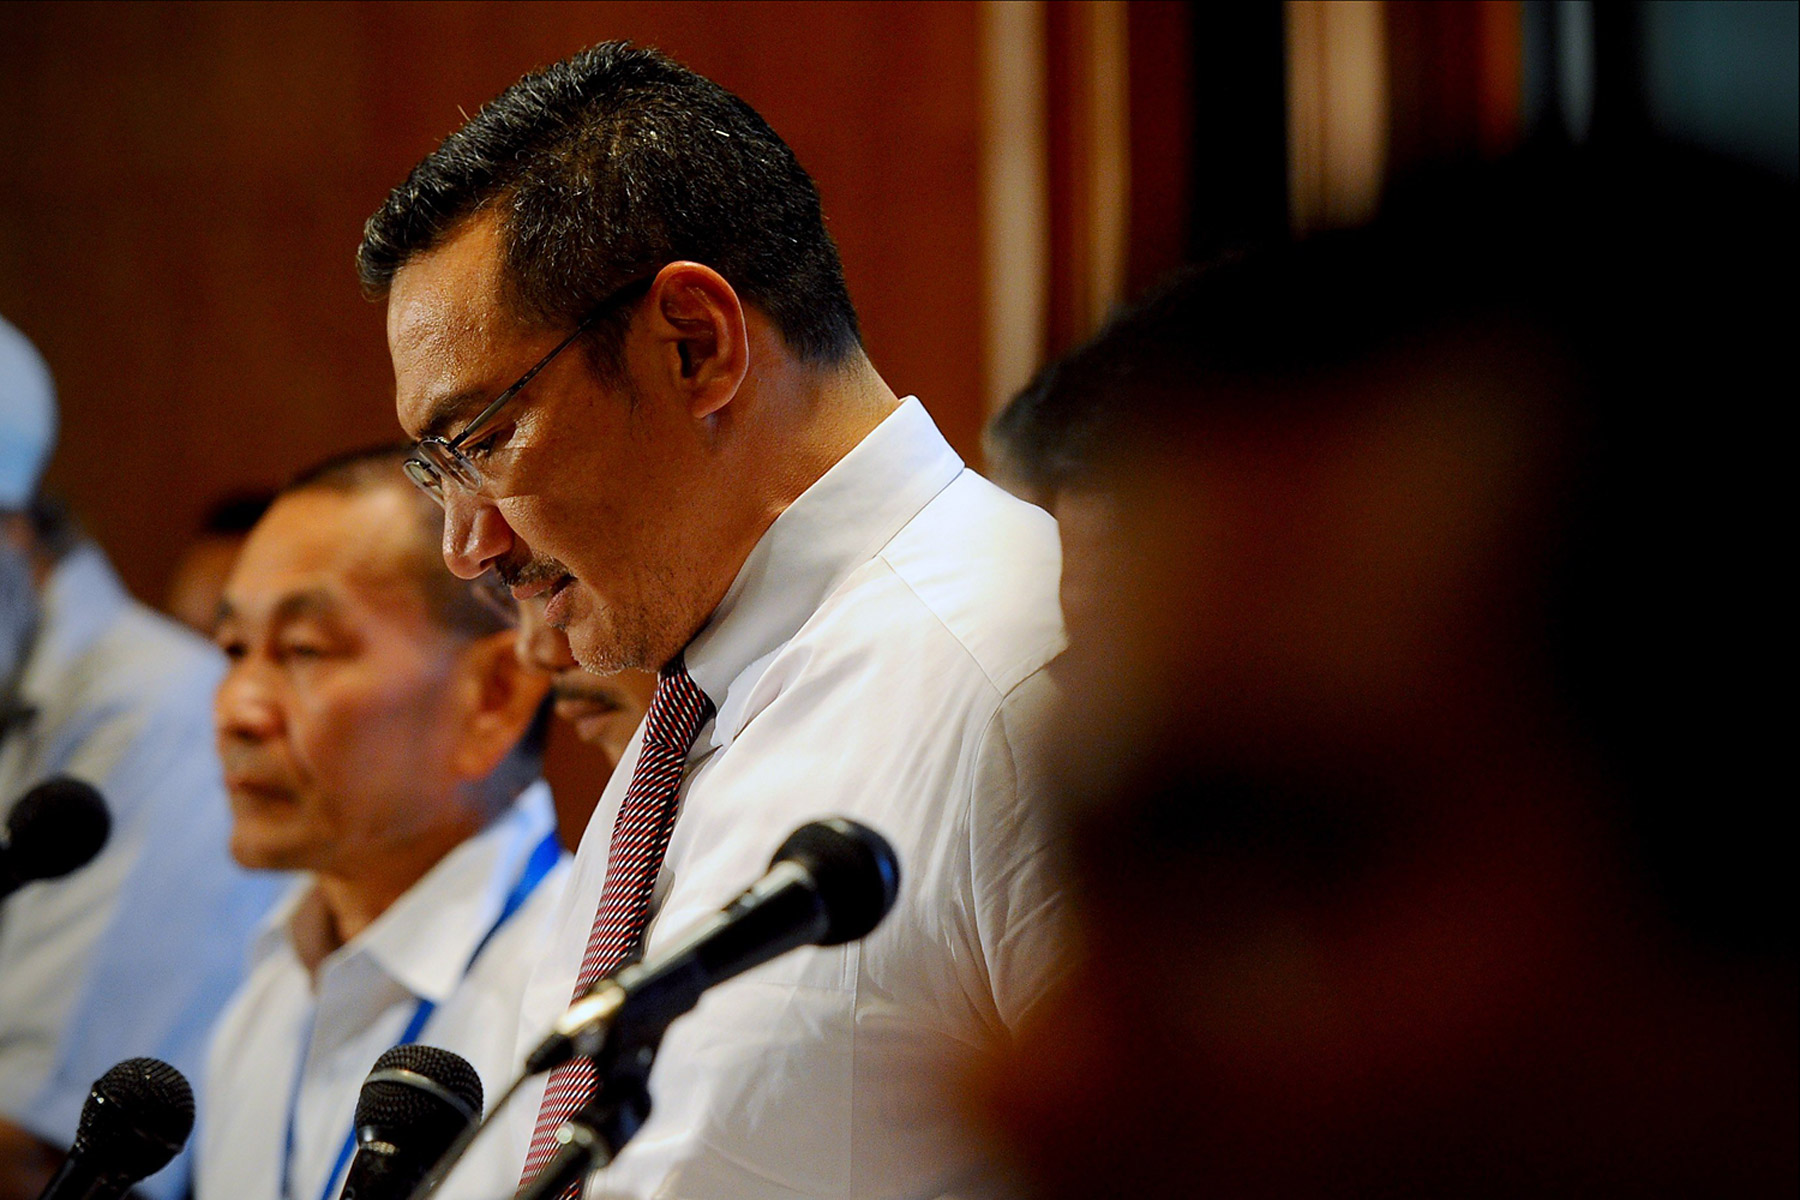 Malaysian Airlines missing flight MH370